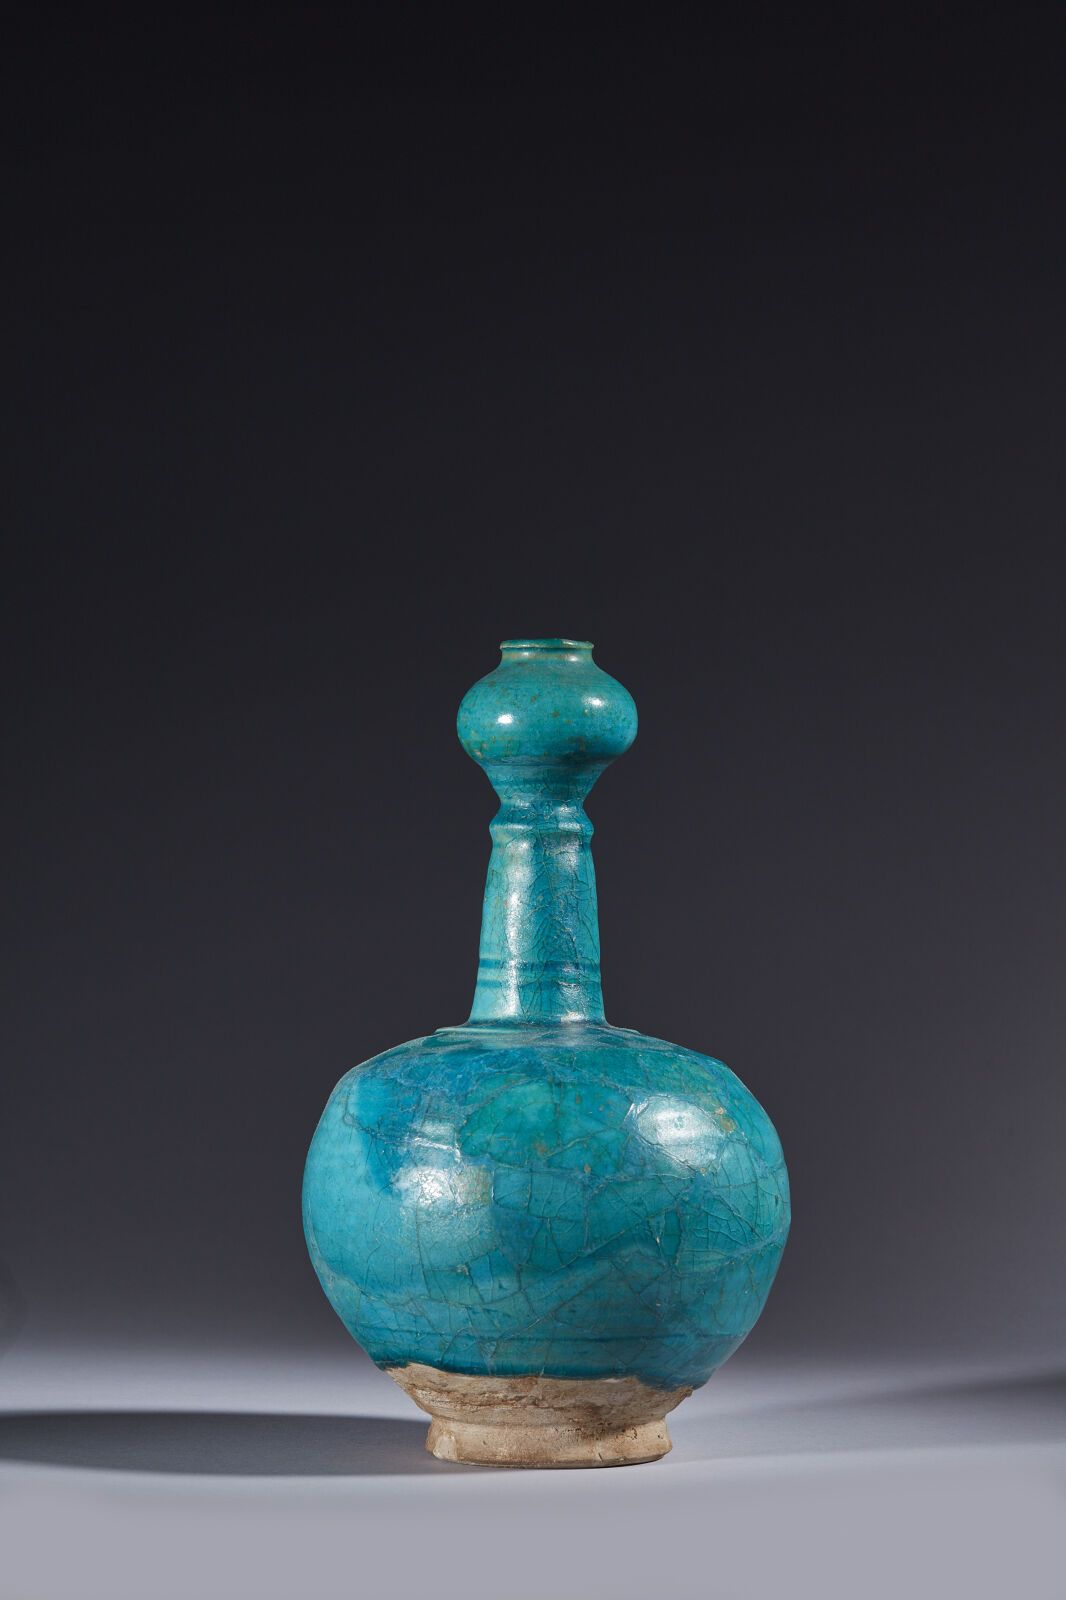 Null IRAN, 12th-13th centuries
Siliceous ceramic bottle with long neck topped by&hellip;